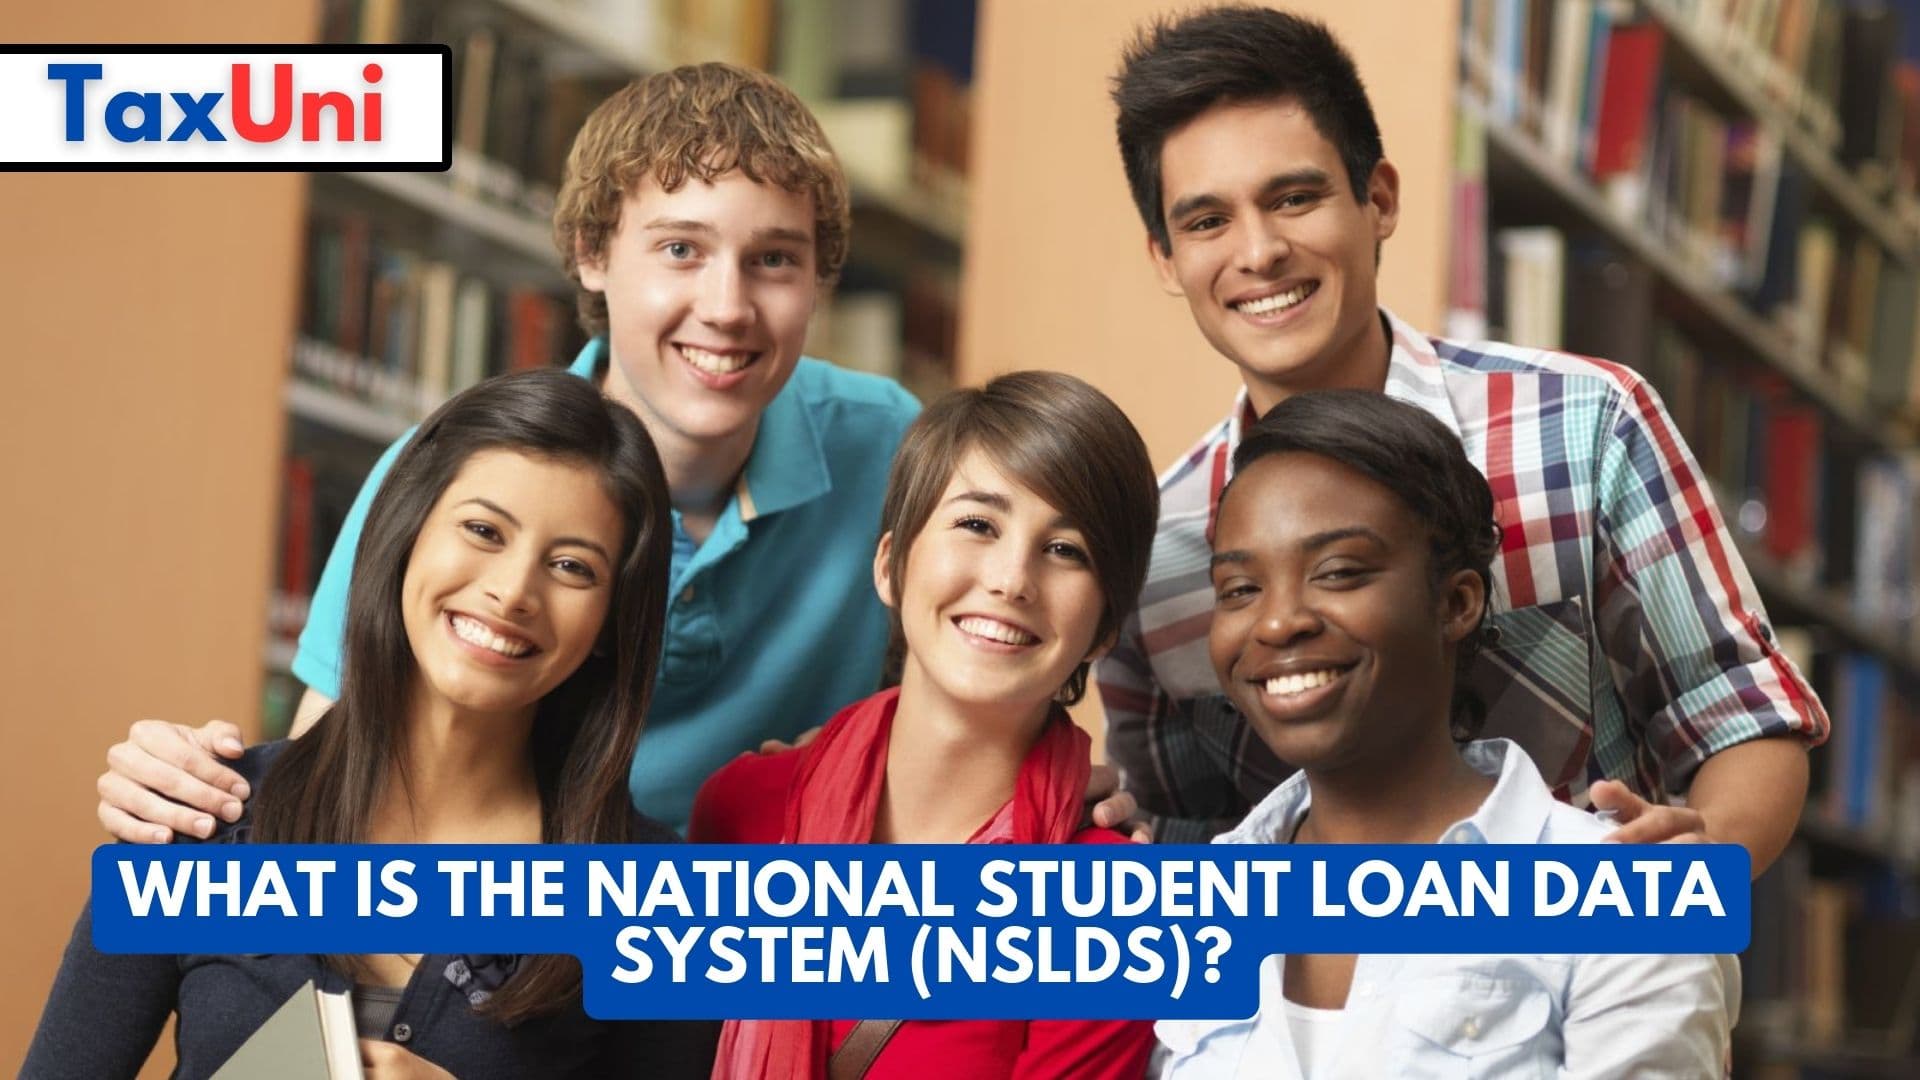 What is the National Student Loan Data System (NSLDS)?